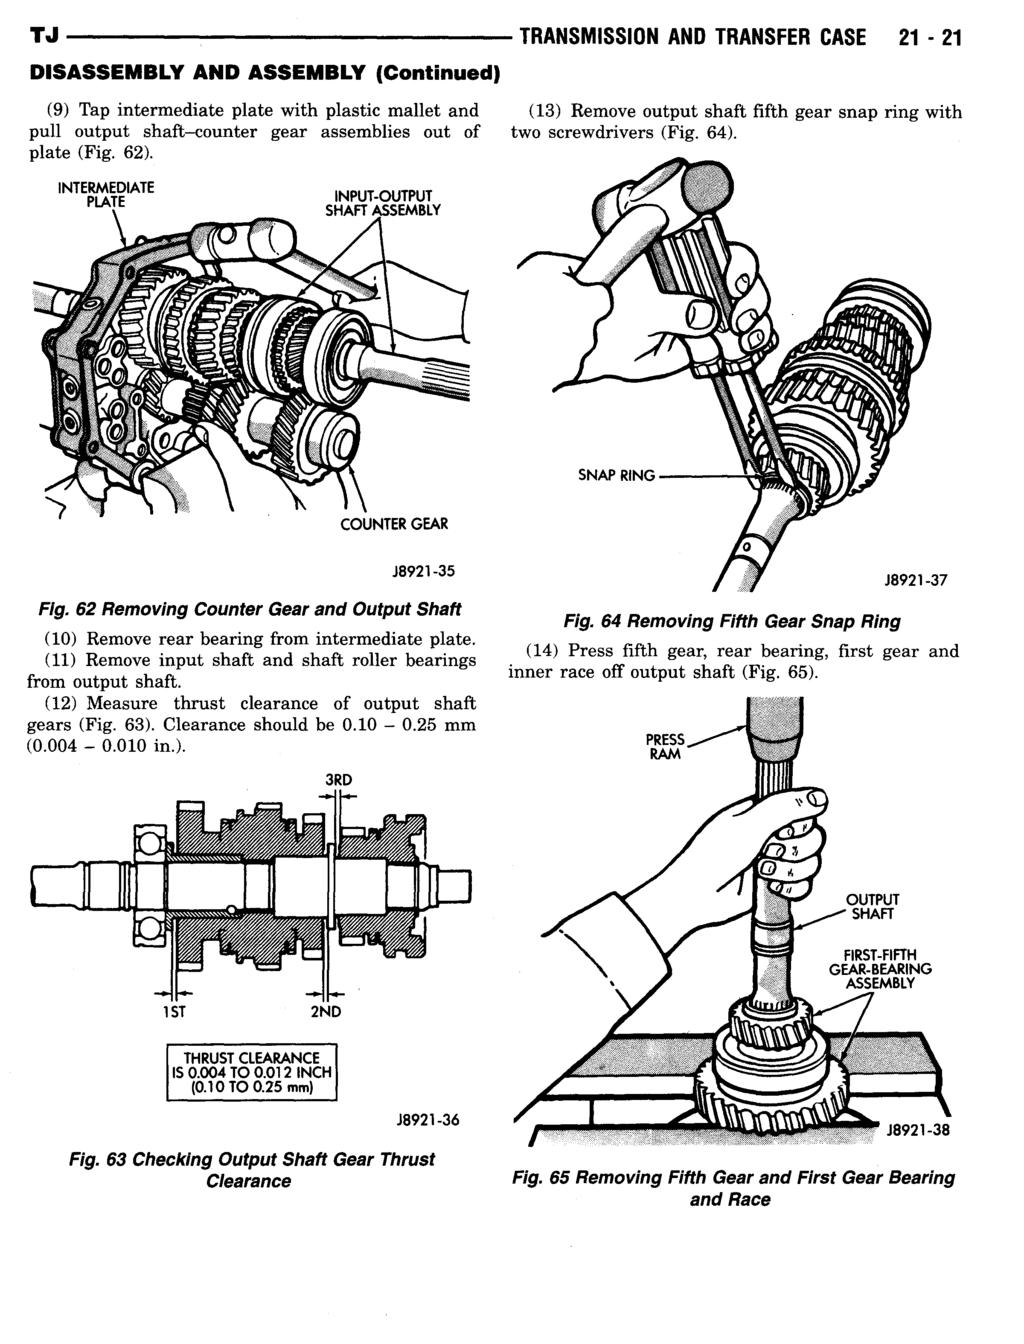 (9) Tap intermediate plate with plastic mallet and pull output shaft-counter gear assemblies out of plate (Fig. 62).